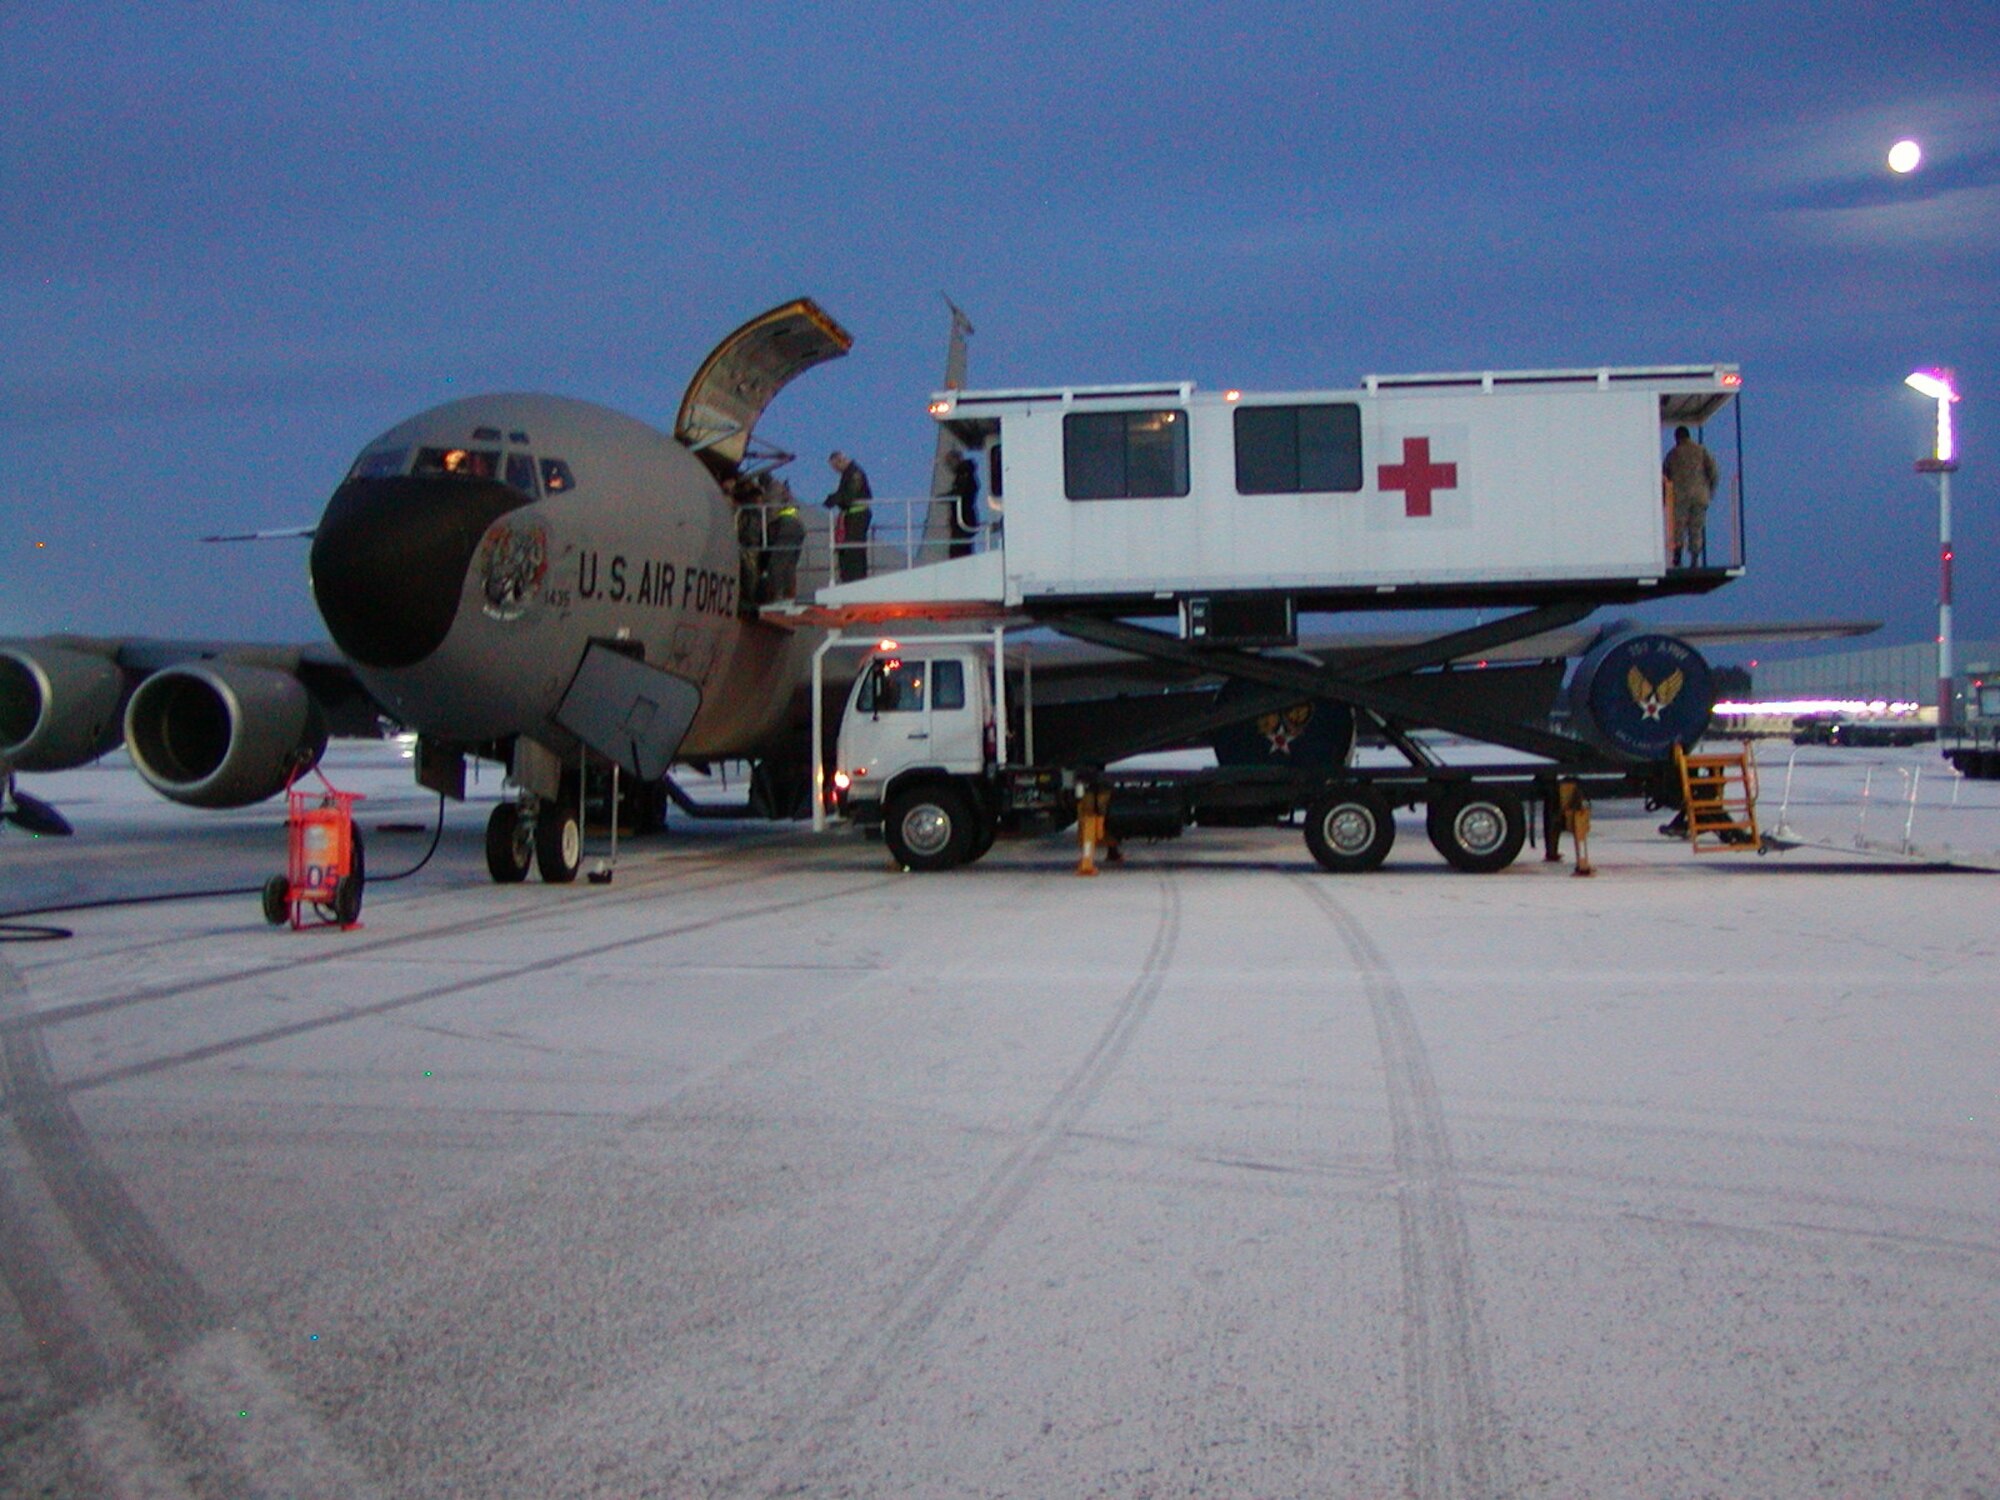 A specialized medical K-Loader prepares to offload patients who have been recently flown in a Utah Air National Guard KC-135 from Bagram Air Base, Afghanistan to Ramstein AB, Germany. Once medical ground crews offload the patients, they will be transported to the Landstuhl Regional Medical Center for further medical treatment. U.S. Air Force photo by Maj. Dan Boyack. (Unclassified)